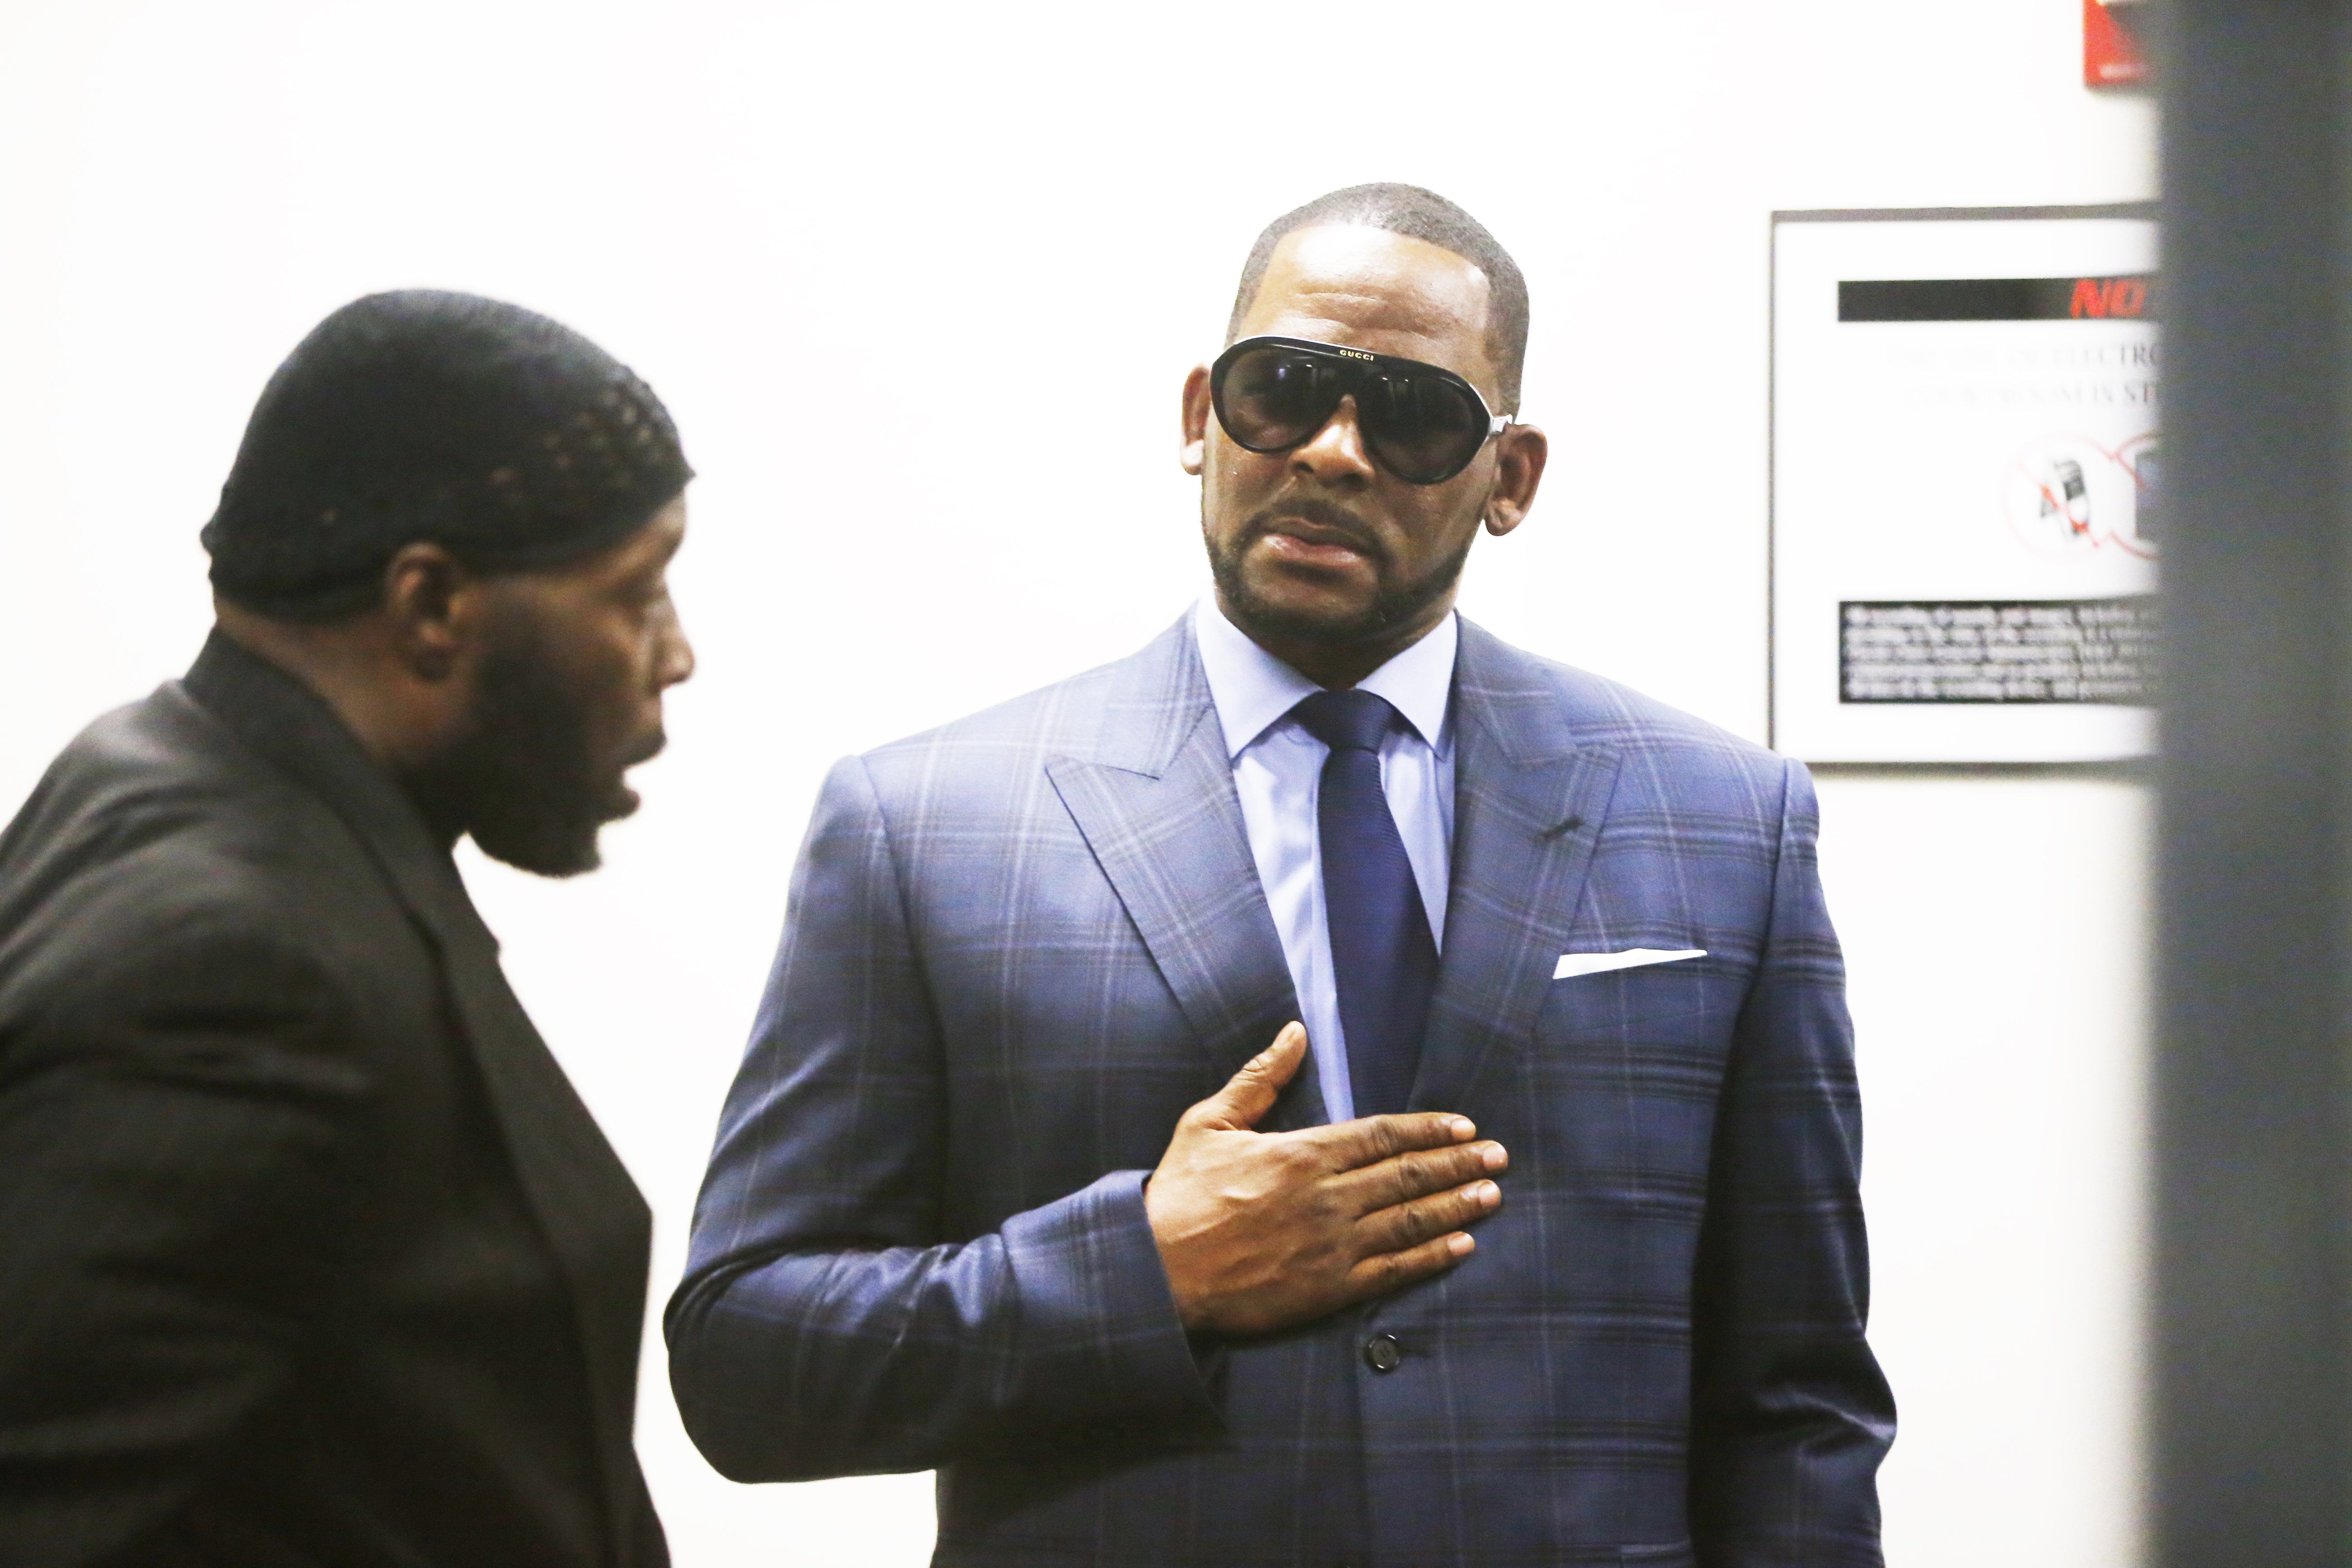 R. Kelly appears in family court over unpaid child support. March 9, 2019. | Photo: GettyImages/Global Images of Ukraine